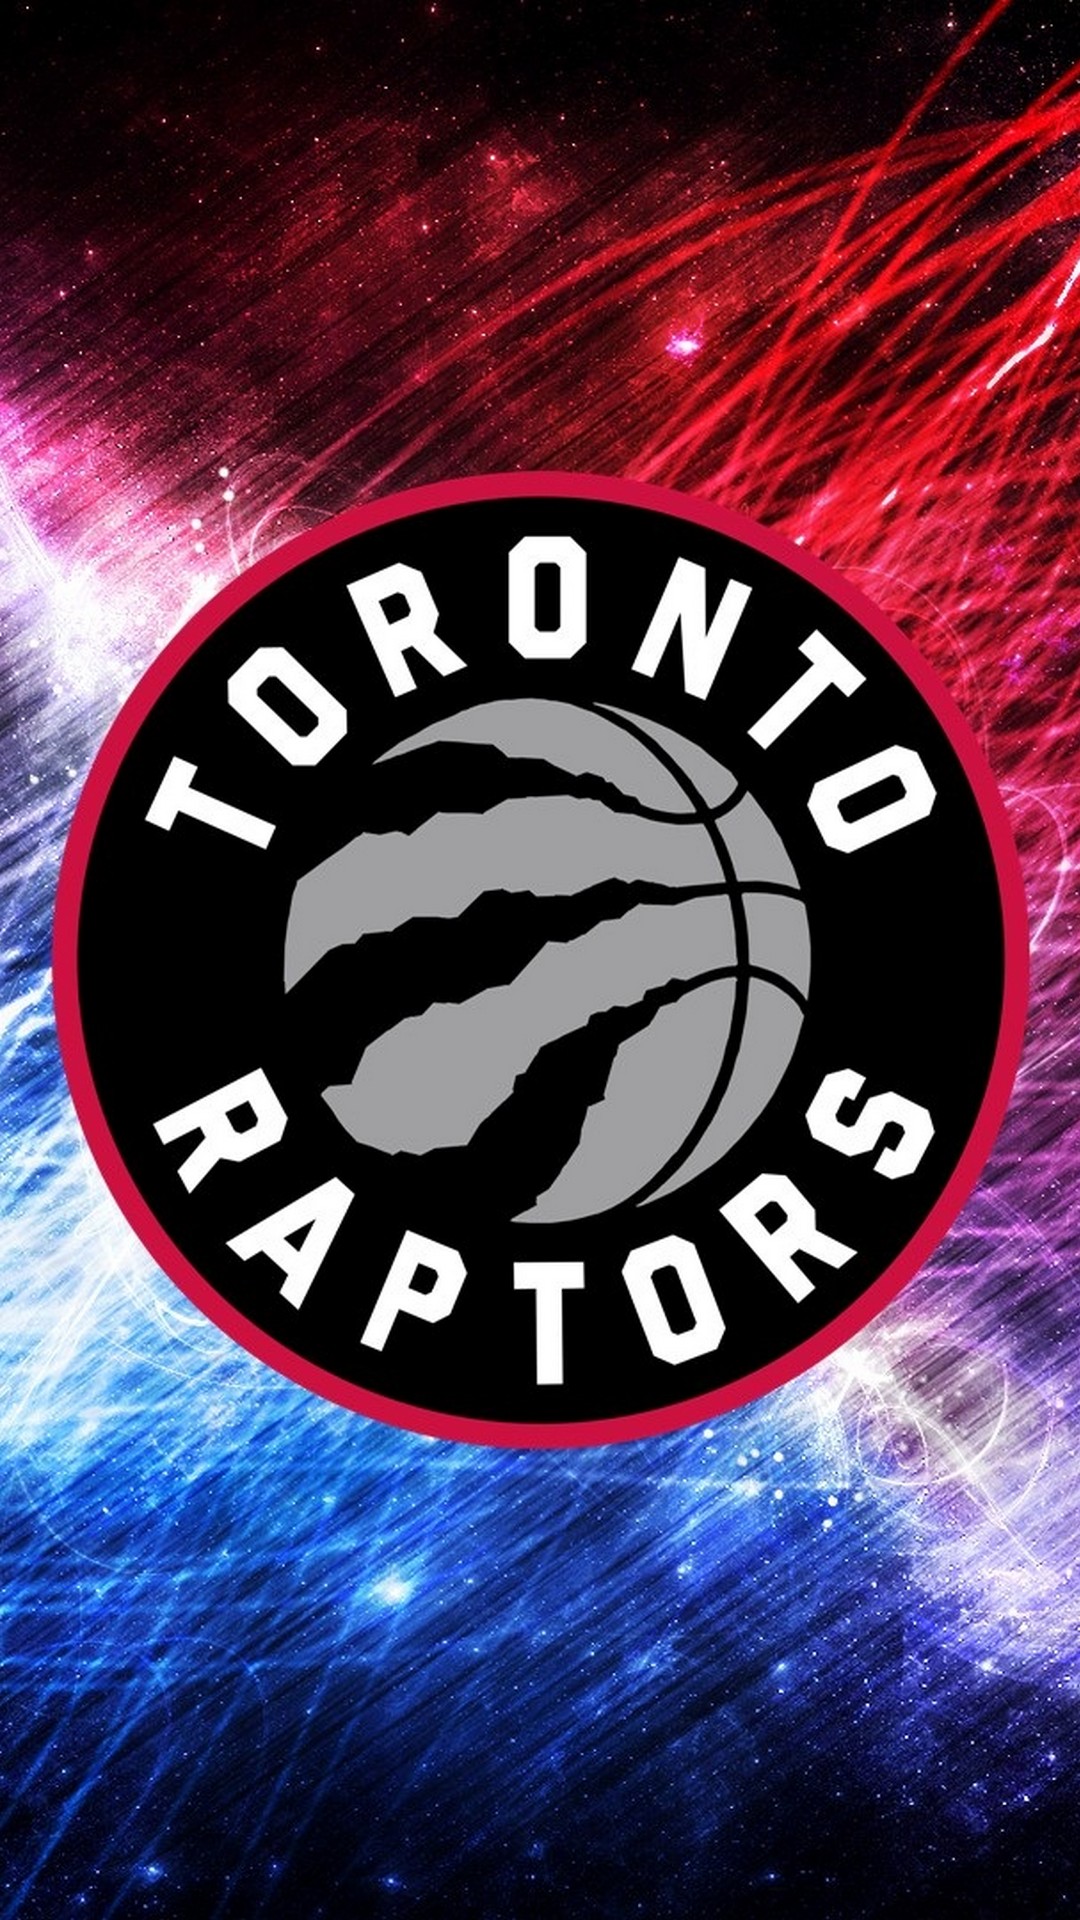 Toronto Raptors iPhone Wallpaper with resolution 1080X1920 pixel. You can make this wallpaper for your iPhone 5, 6, 7, 8, X backgrounds, Mobile Screensaver, or iPad Lock Screen